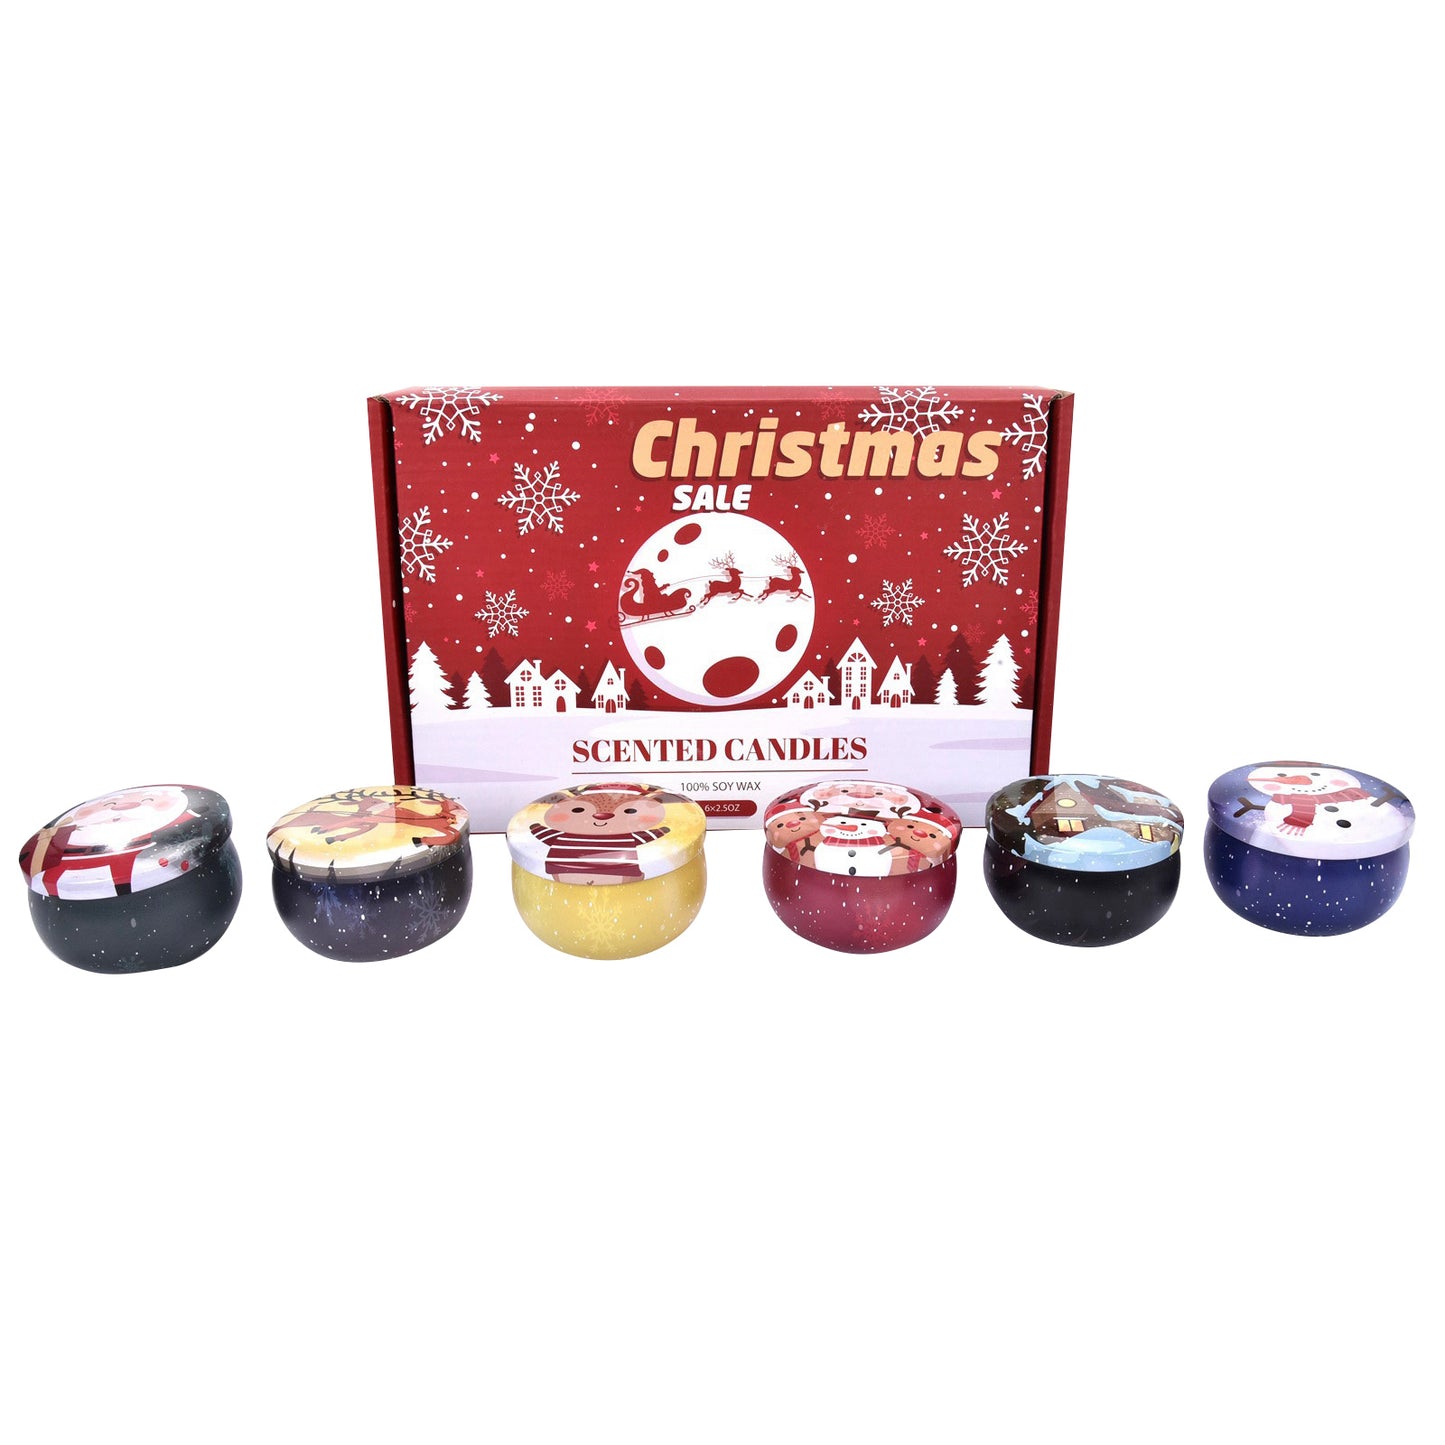 Christmas scented candle gift 6-pack